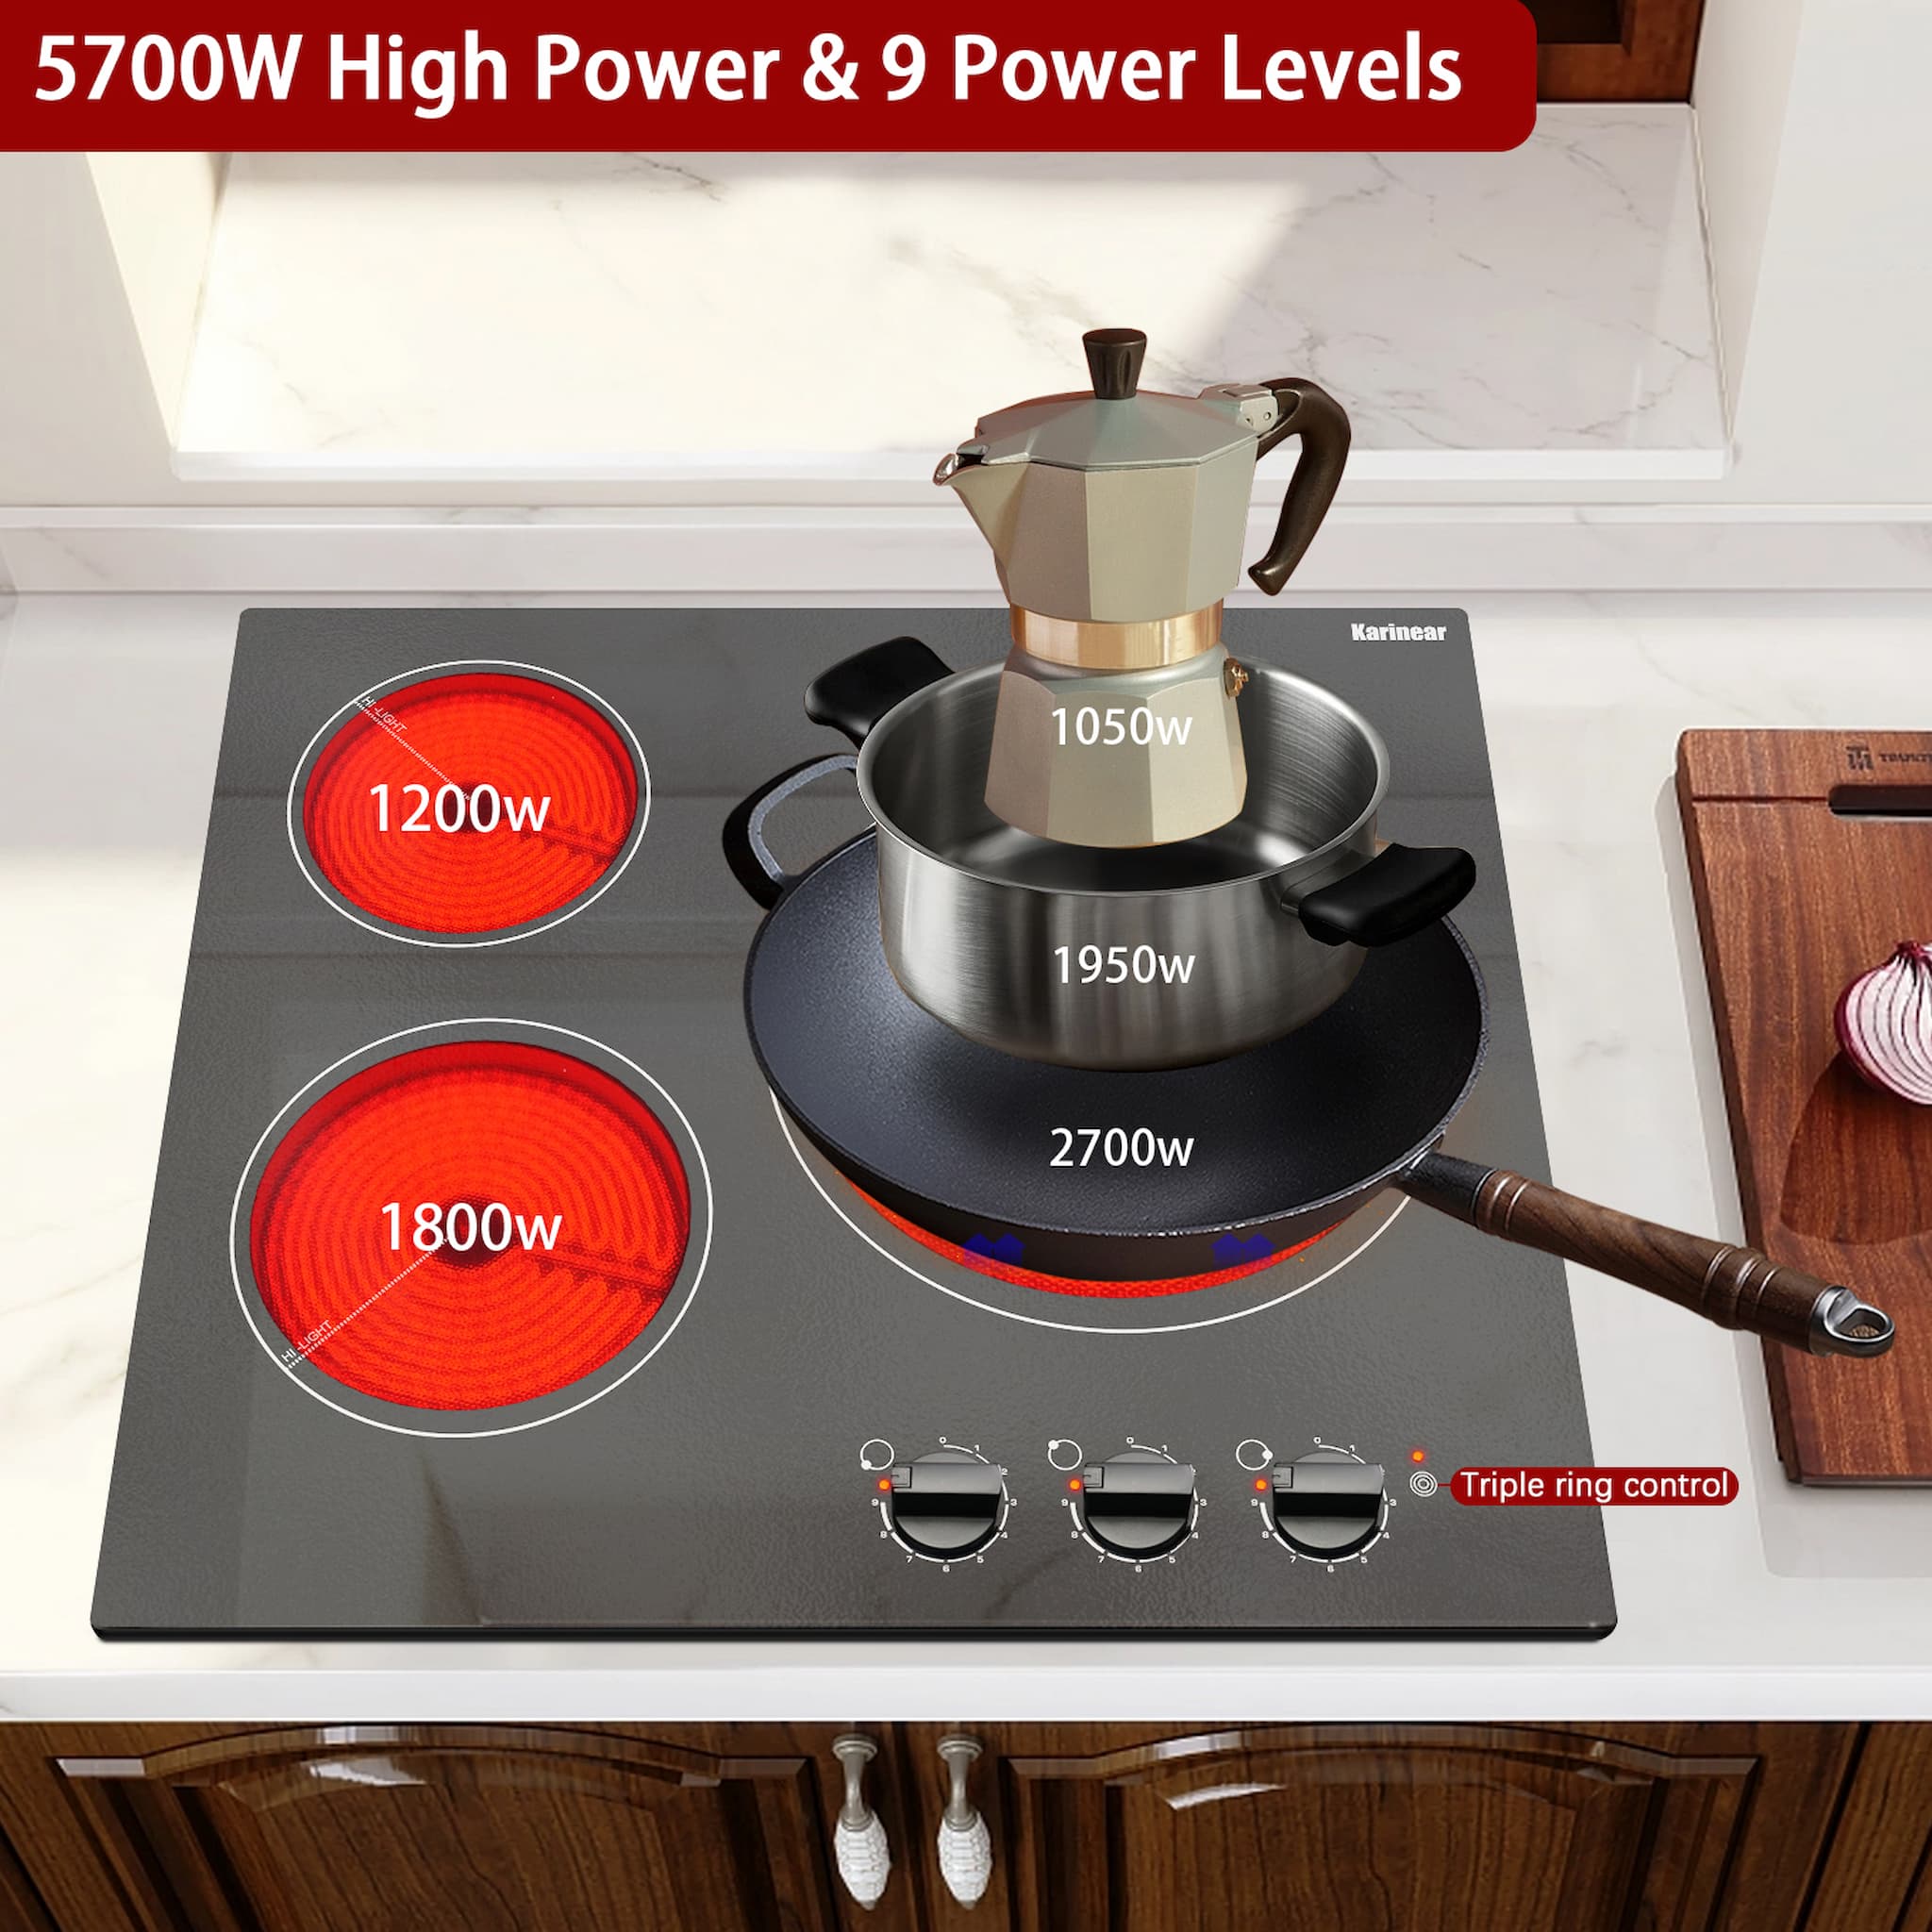 Electric stove 3 burners, the lowest power burner is 1050W and the largest burner can be up to 2700W when the outer ring is opened. Each burner has 9 power levels, suitable for cooking a wide variety of foods.